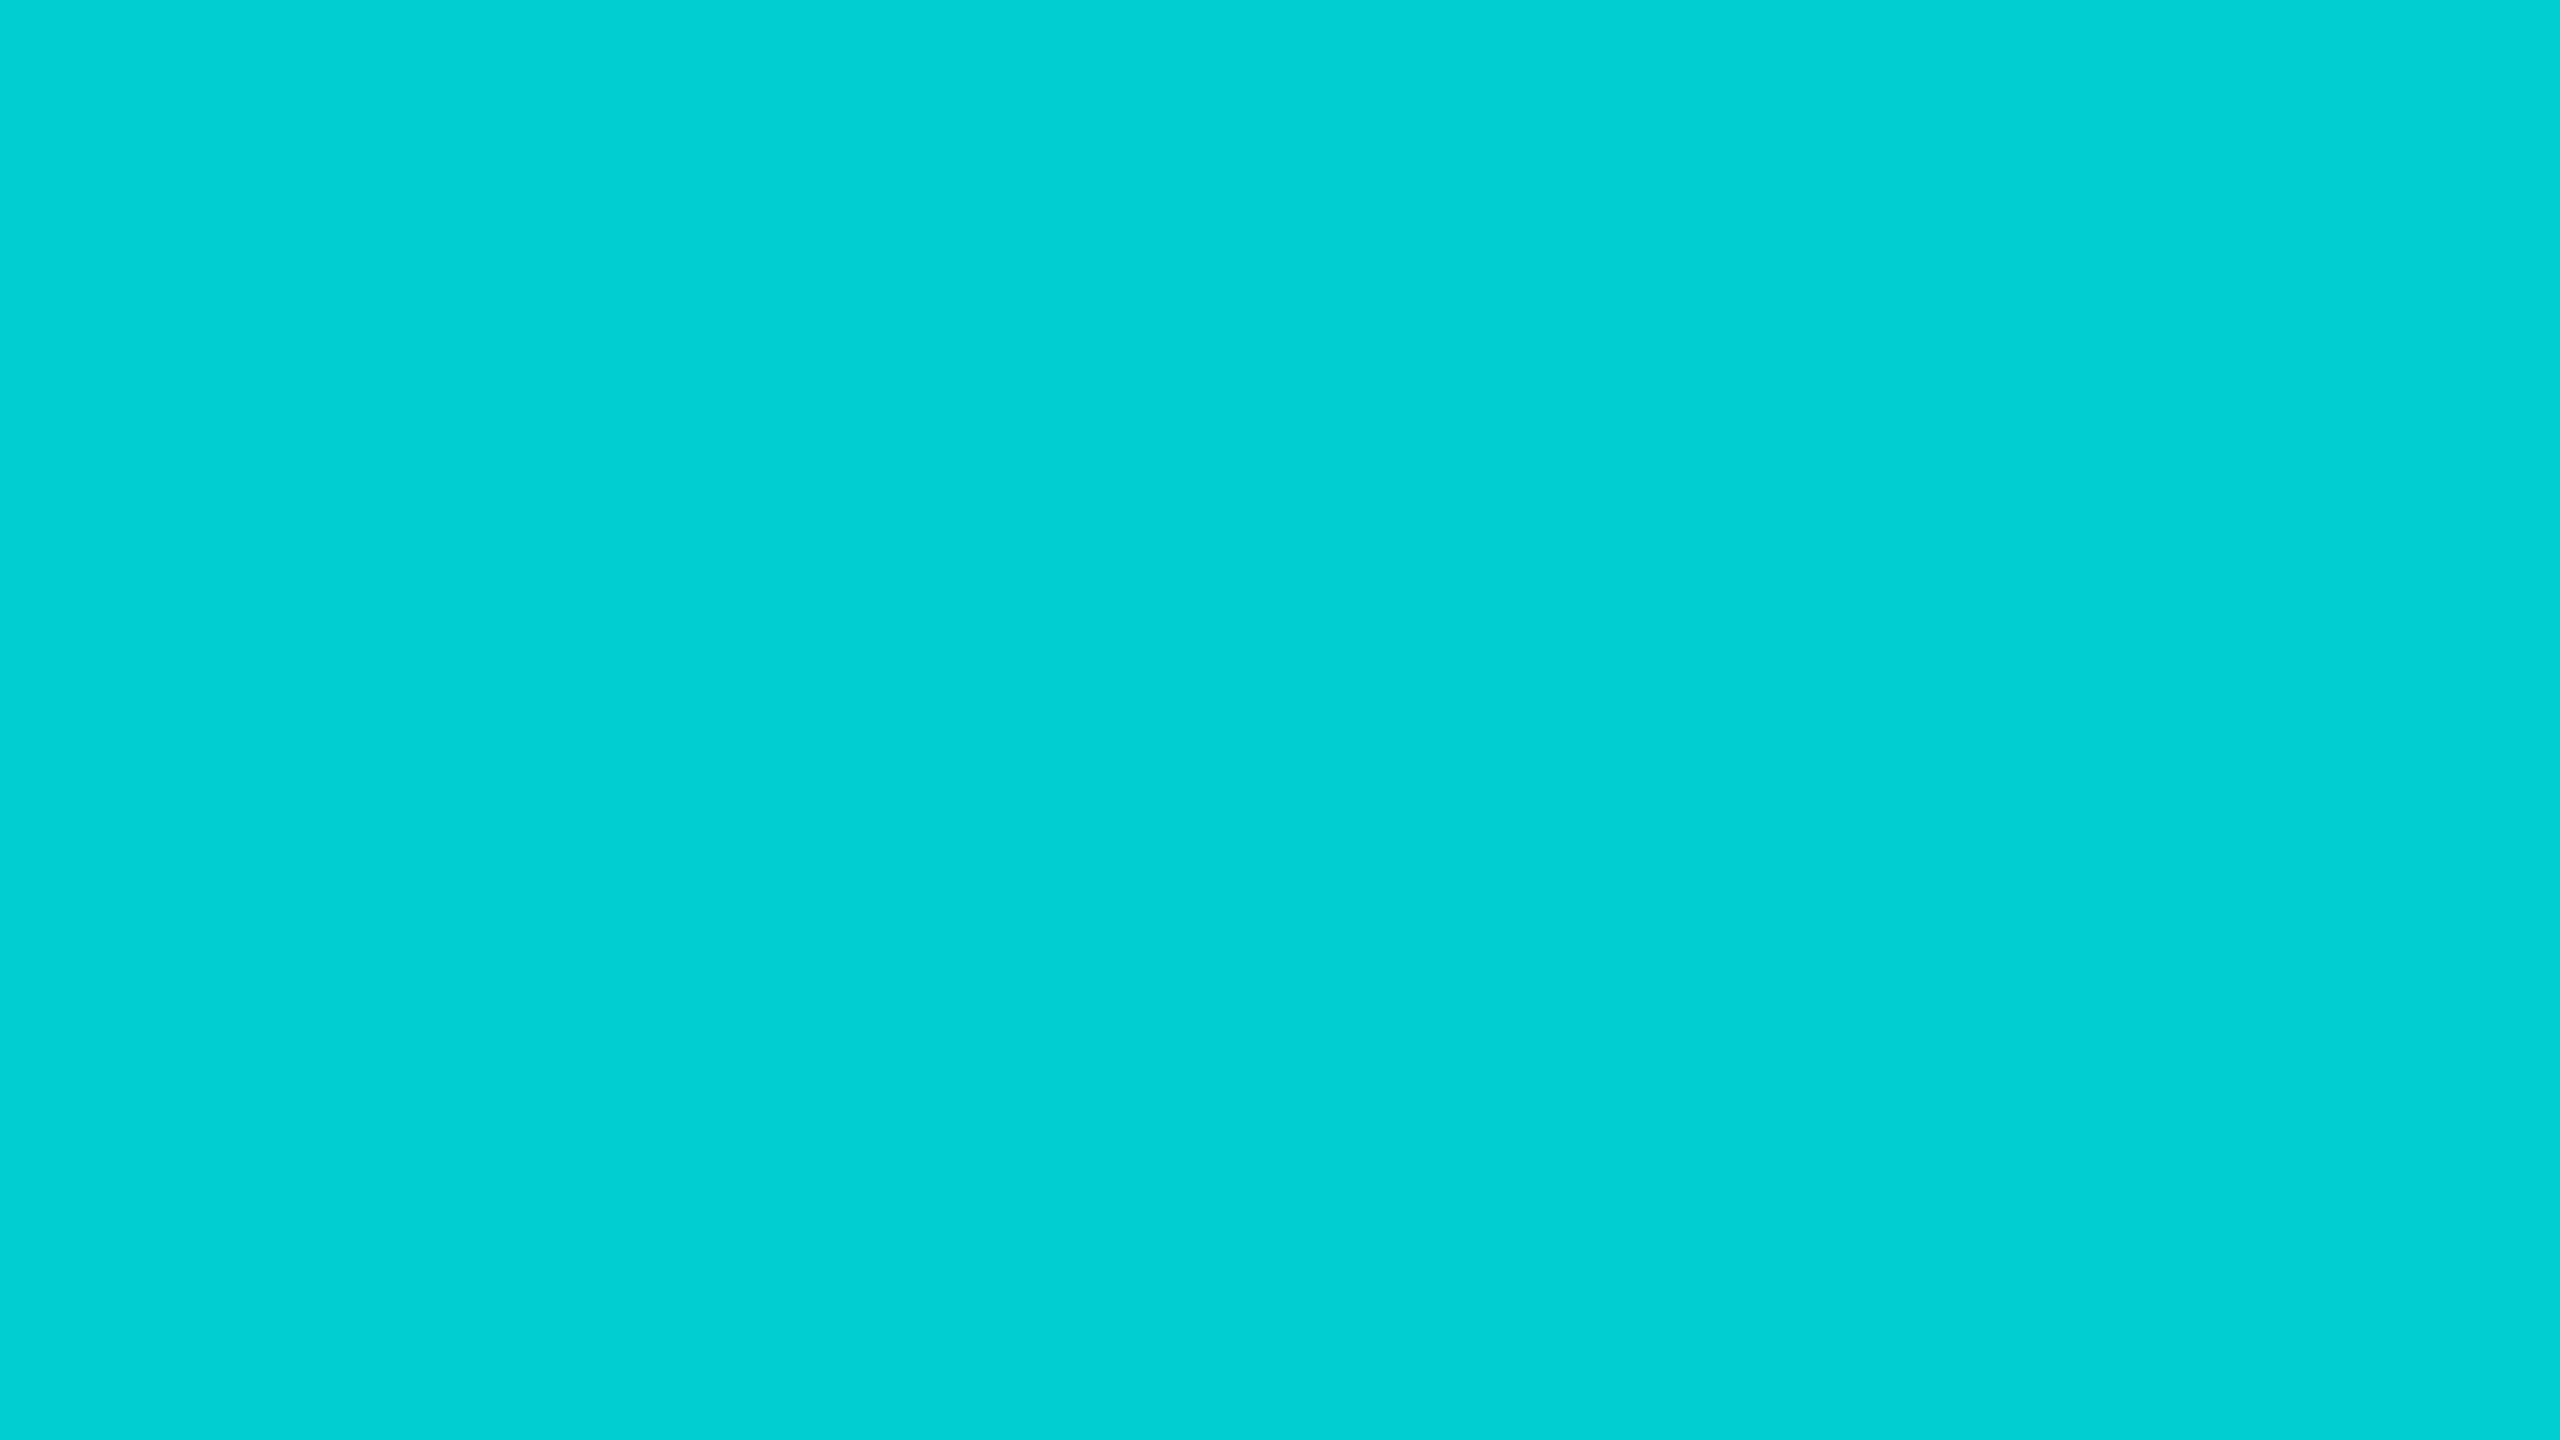 2560x1440 Dark Turquoise Solid Color Background
